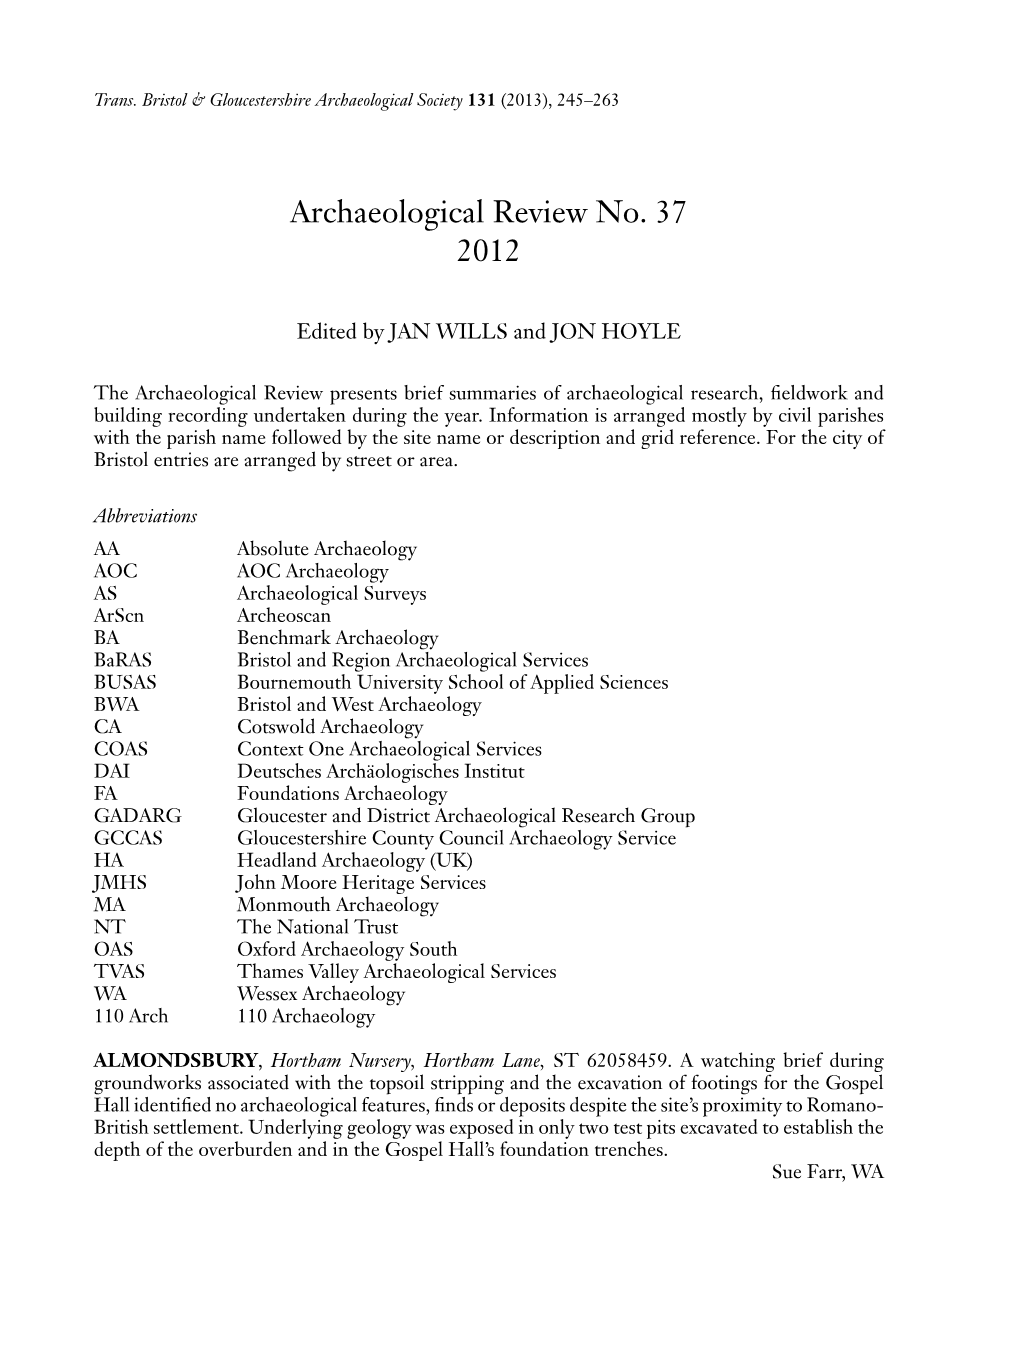 Archaeological Review No. 37 2012